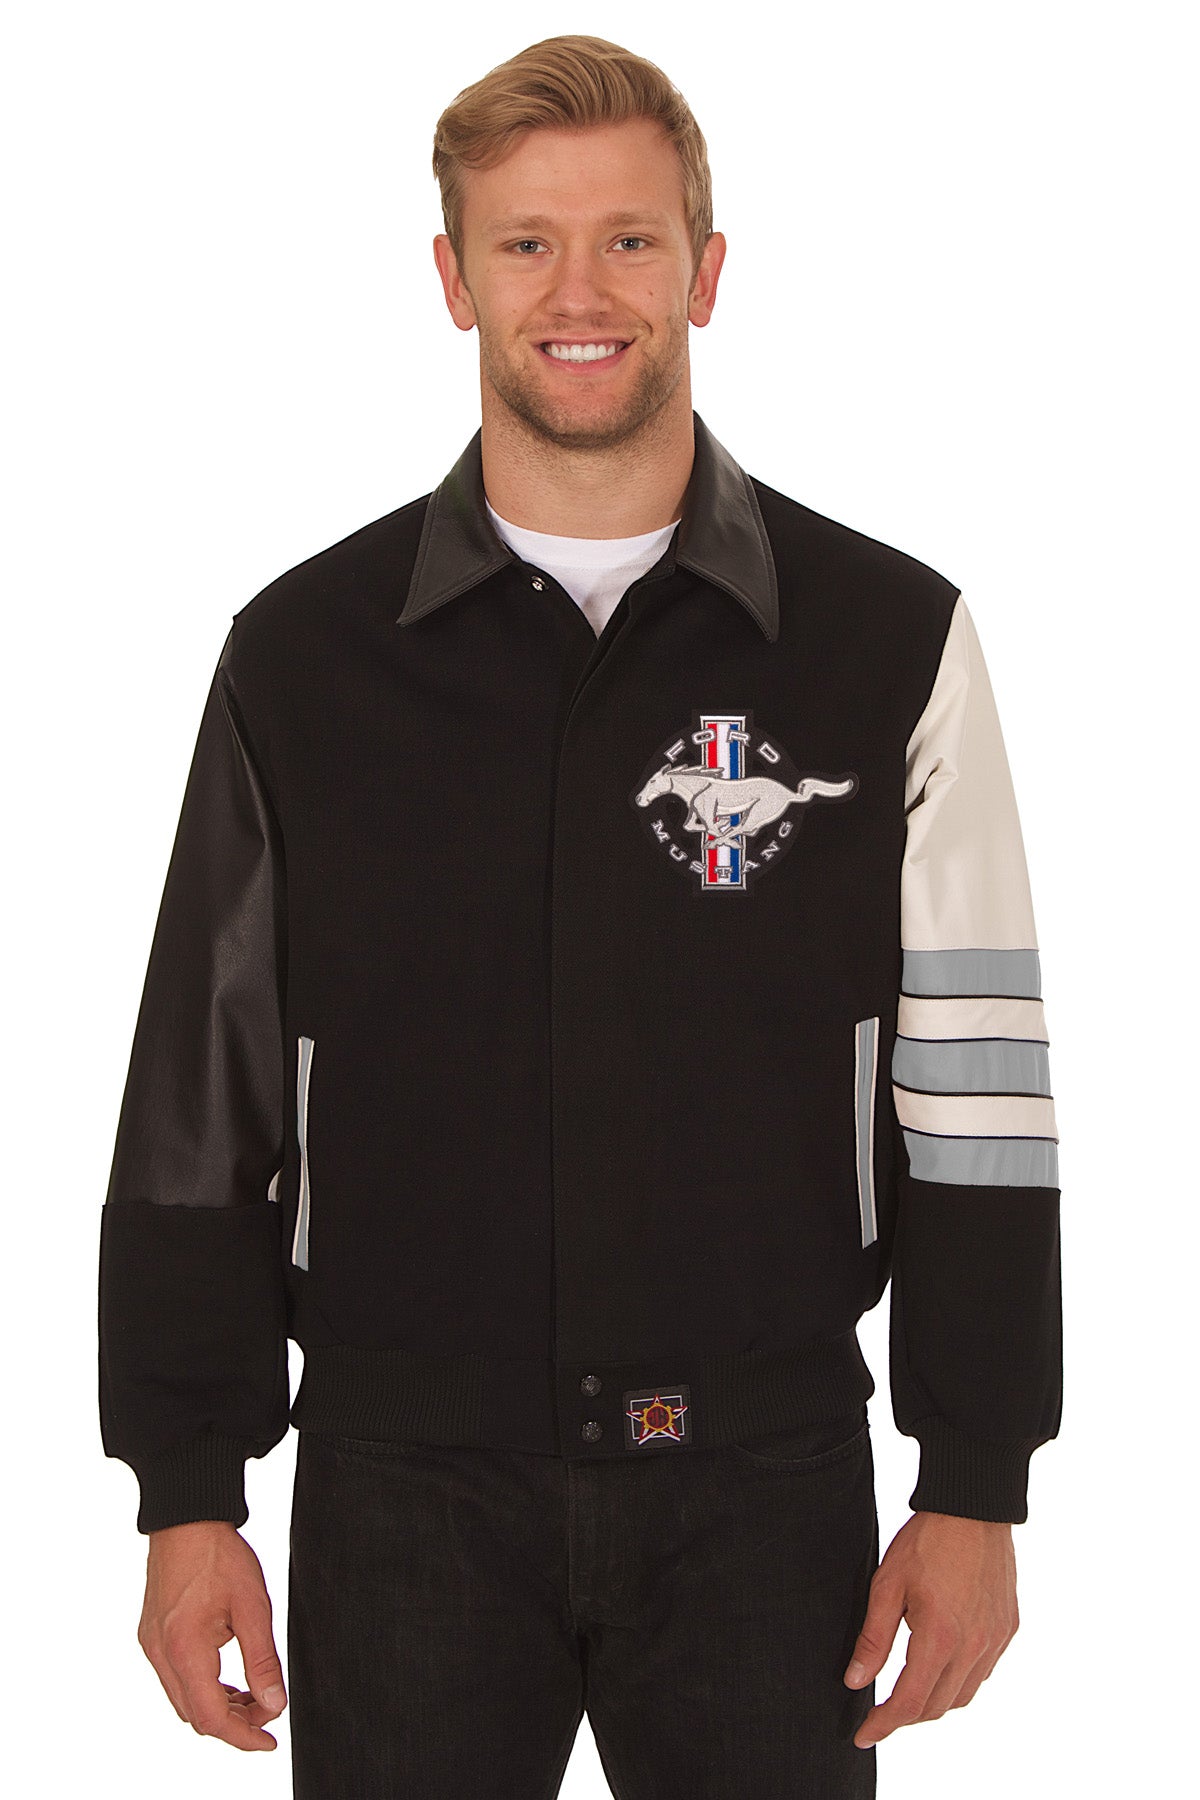 Sports | Embroidered Wool Ford & Leather Jackets - Jacket Mustang Black/Grey J.H.